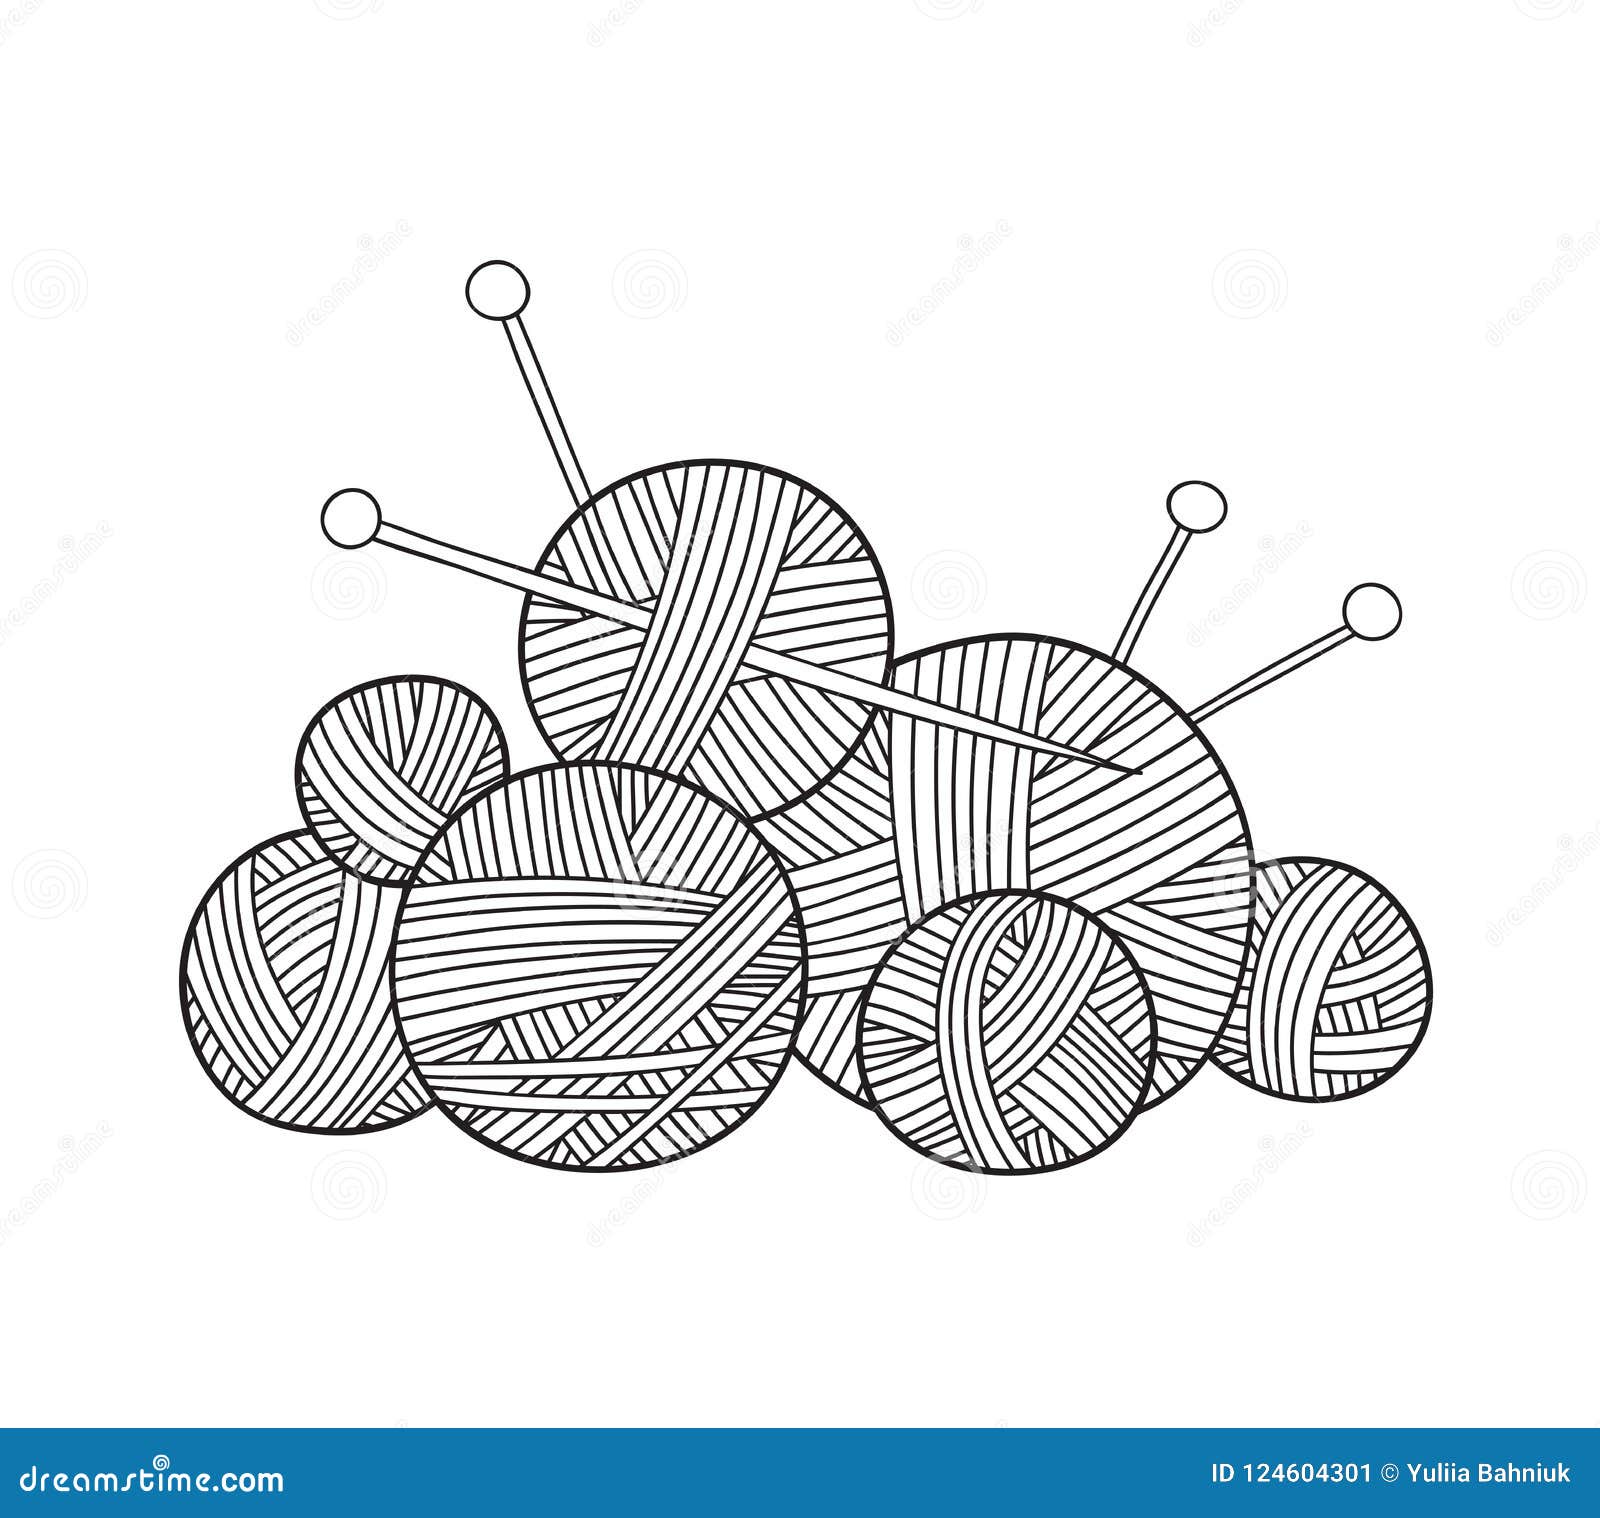 Vector Illustration Of Ball Of Yarn With Knitting Needles